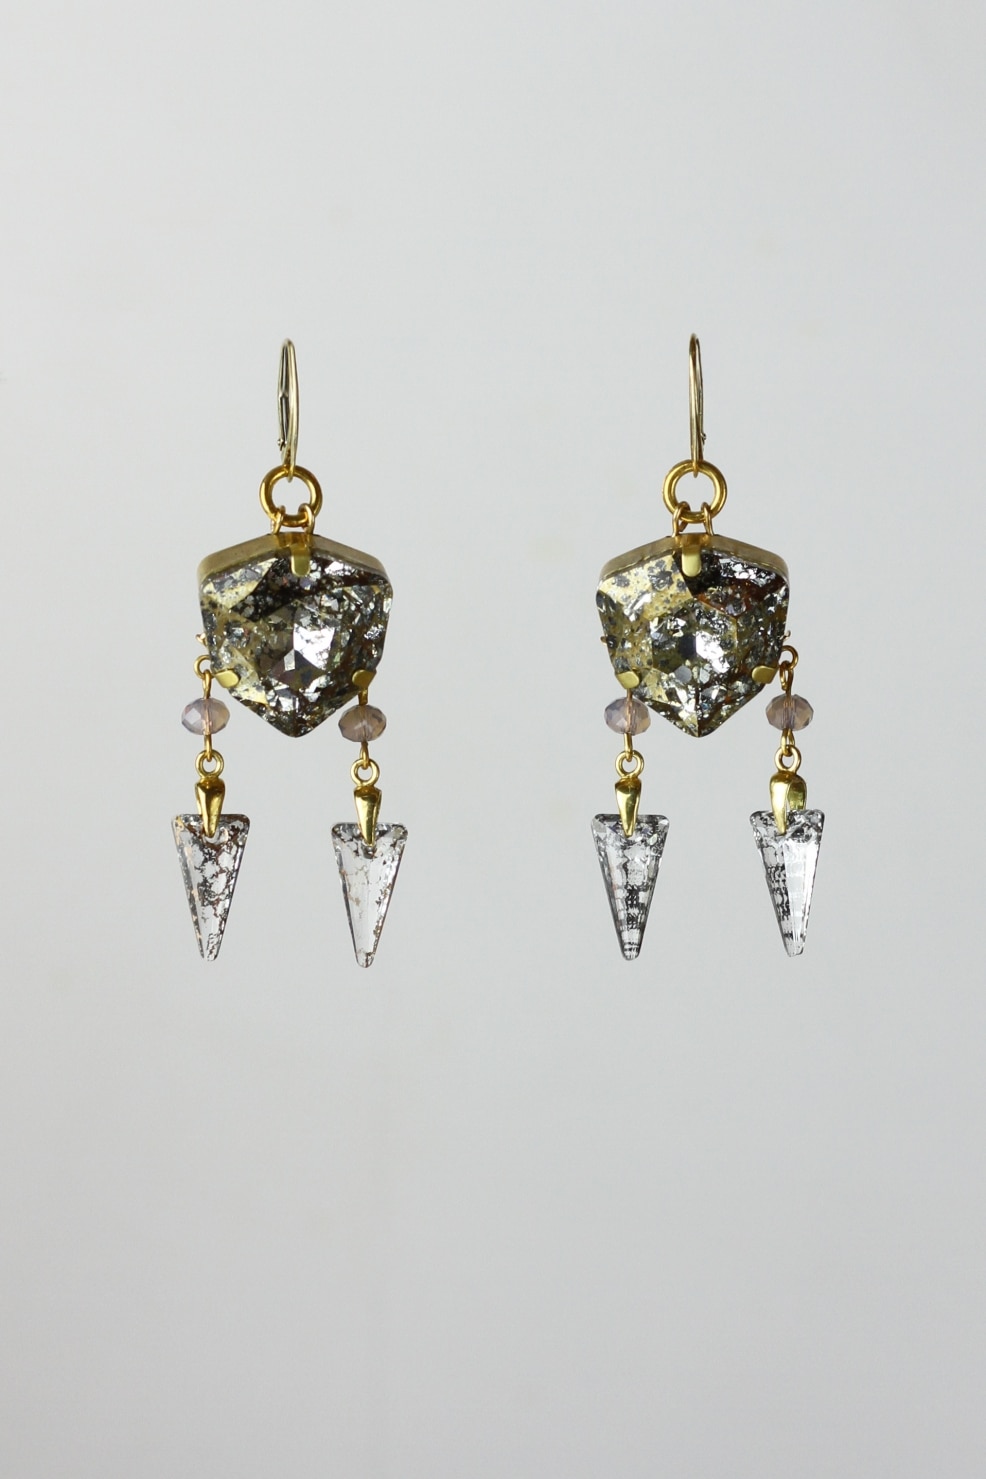 Swarovski and gold pleated silver earrings